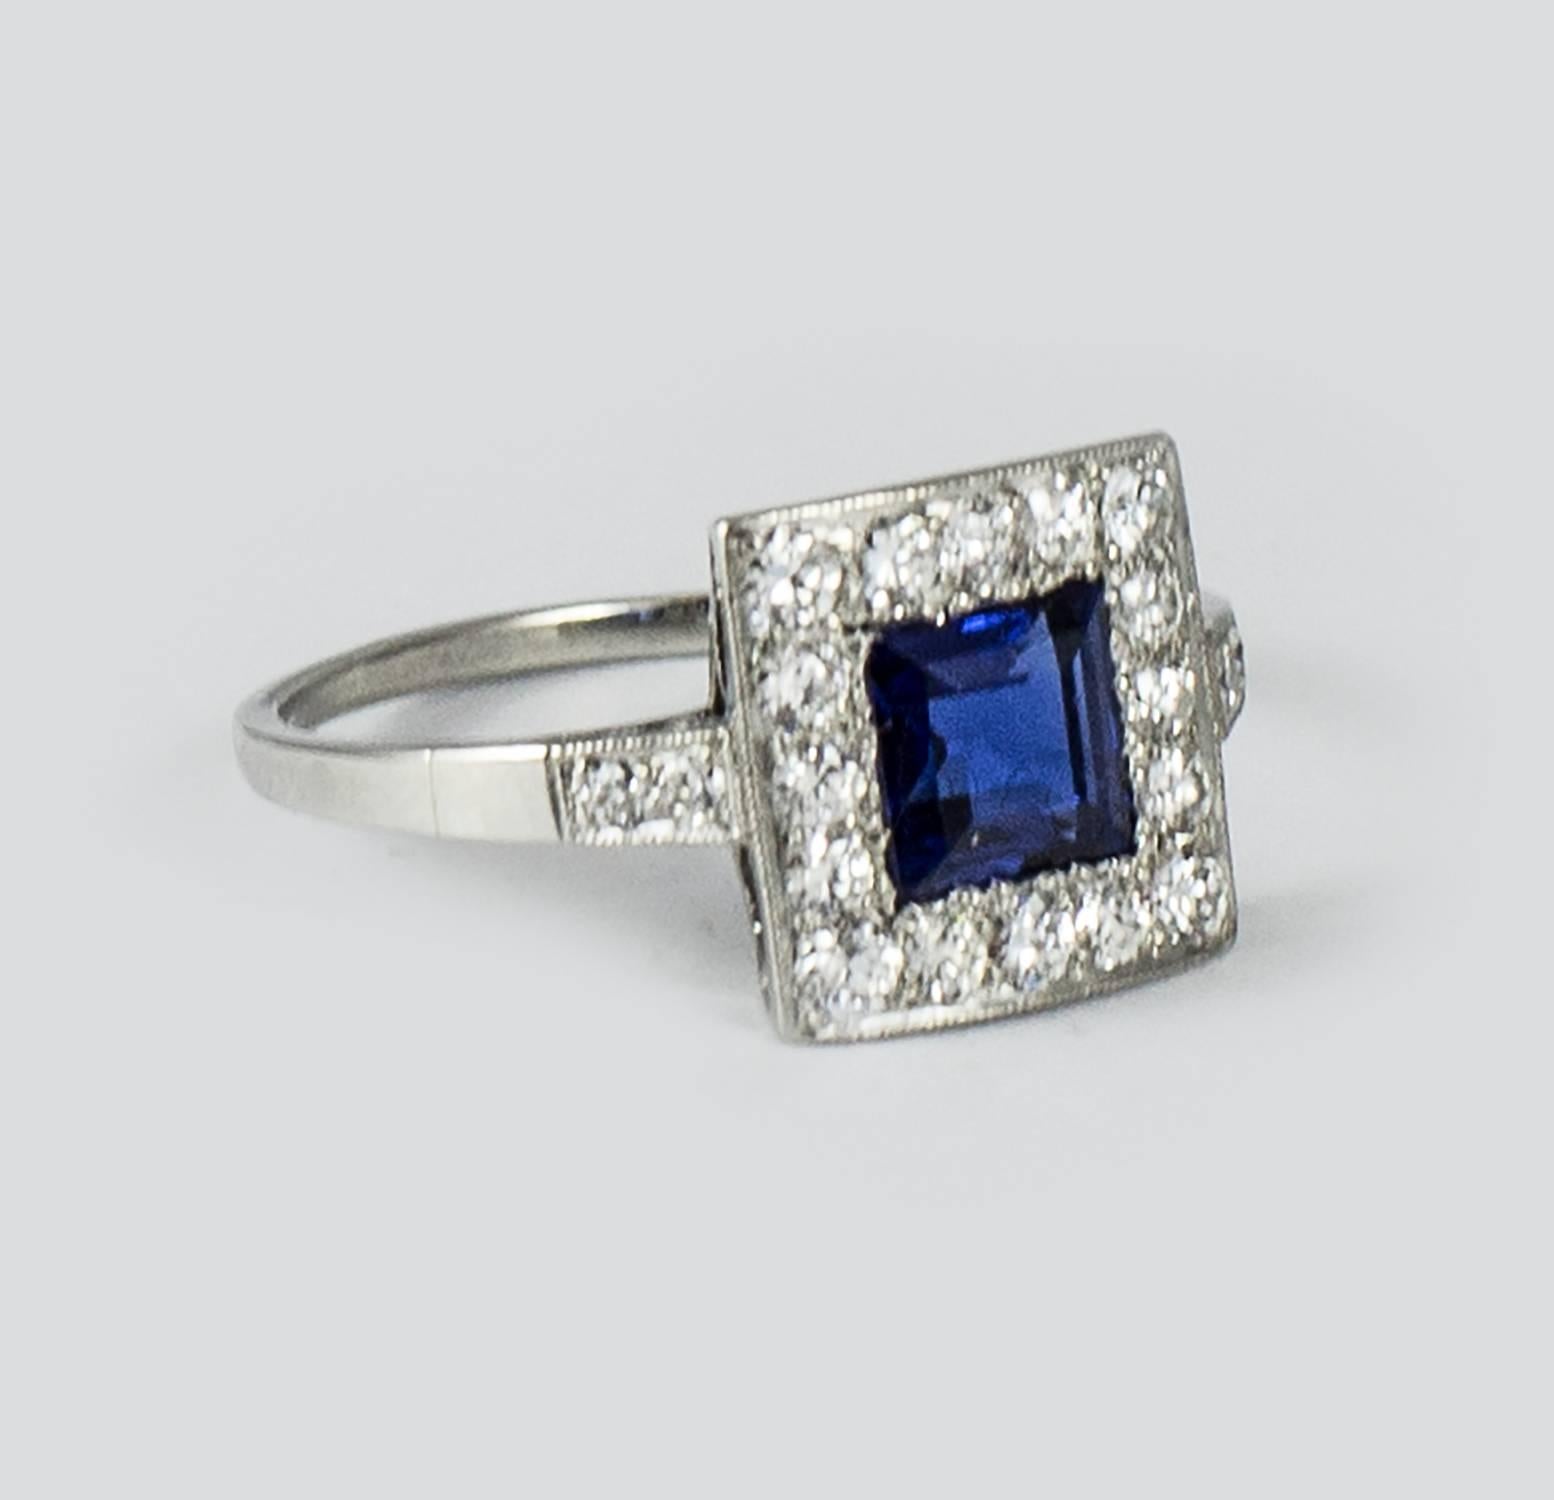 A delightful Art Deco Sapphire ring set in platinum. The custom made mount holds a deep blue step cut square sapphire weighing .90 ct. It is framed by 20 excellent quality bead set old European cut diamonds. The ring has lovely hand mill grain